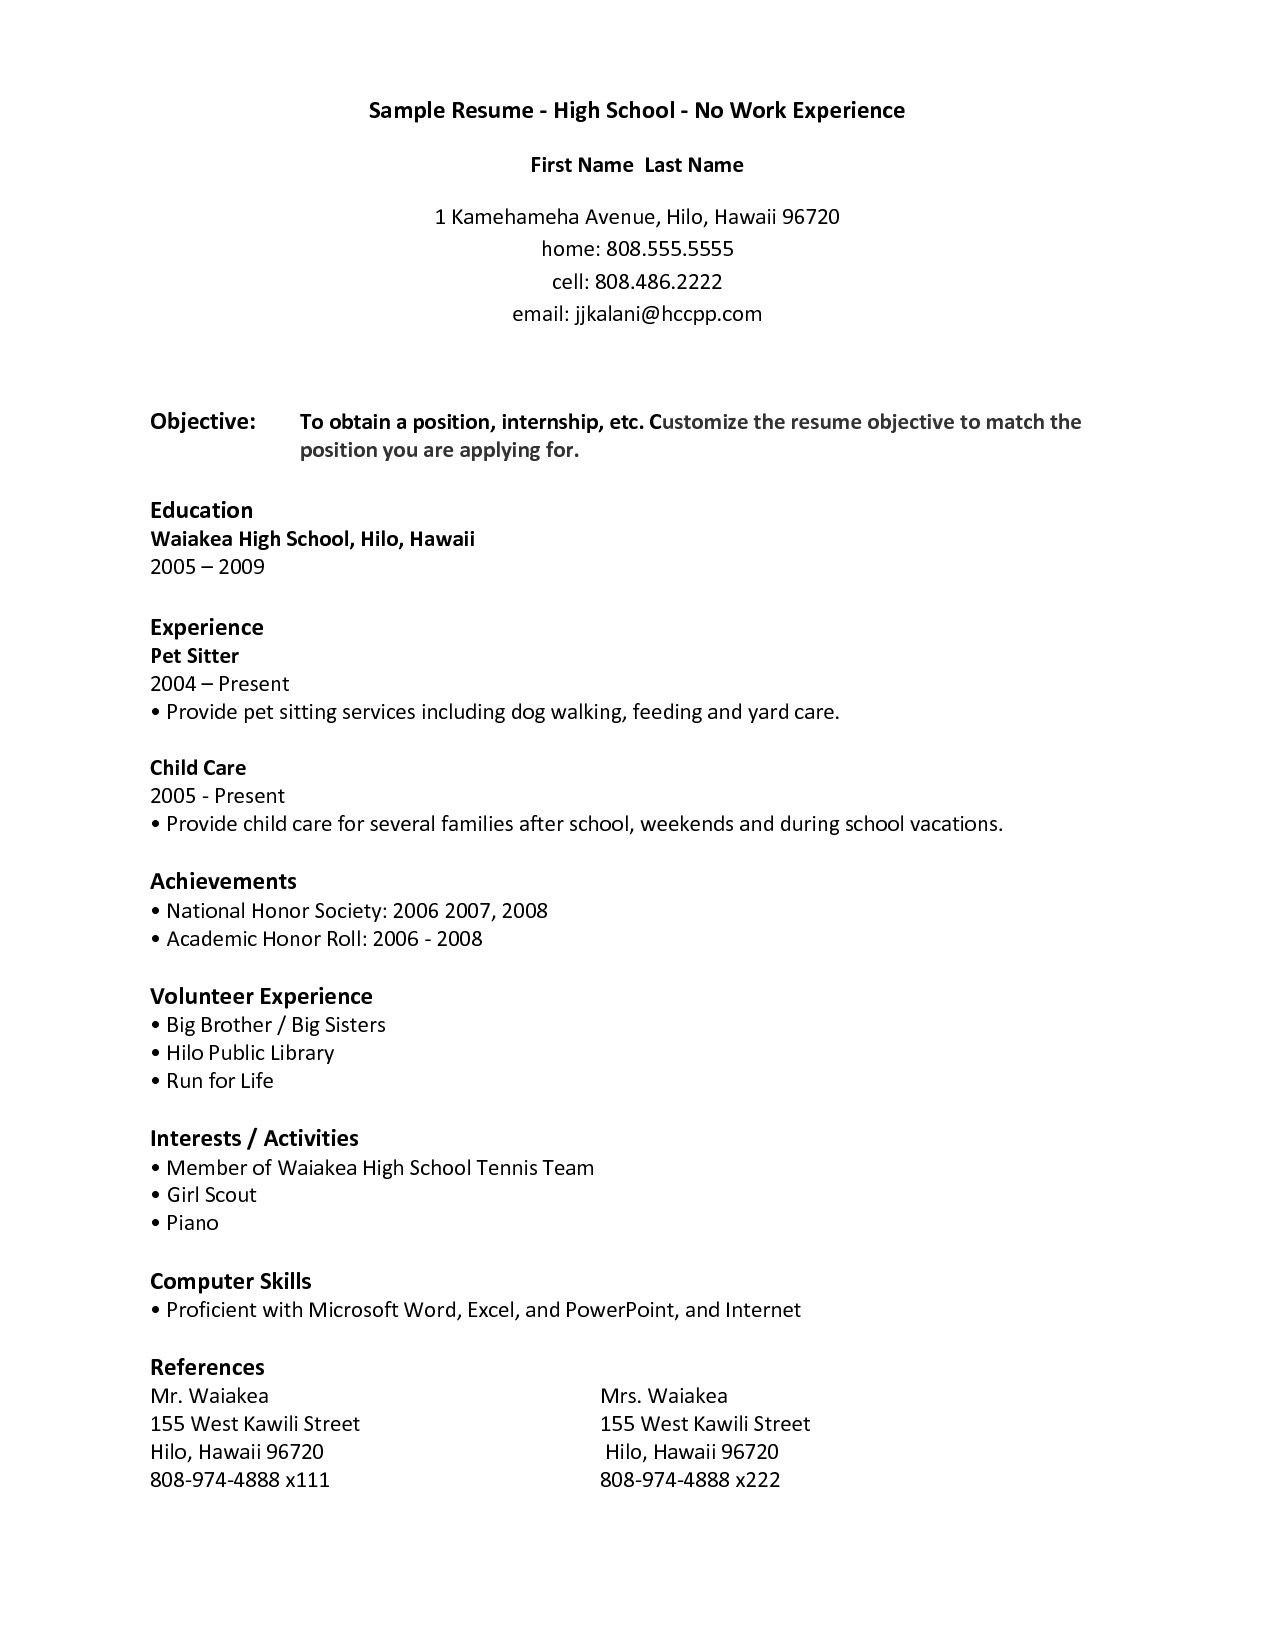 Resume Objective Sample for No Experience Free Resume Templates No Work Experience #experience …